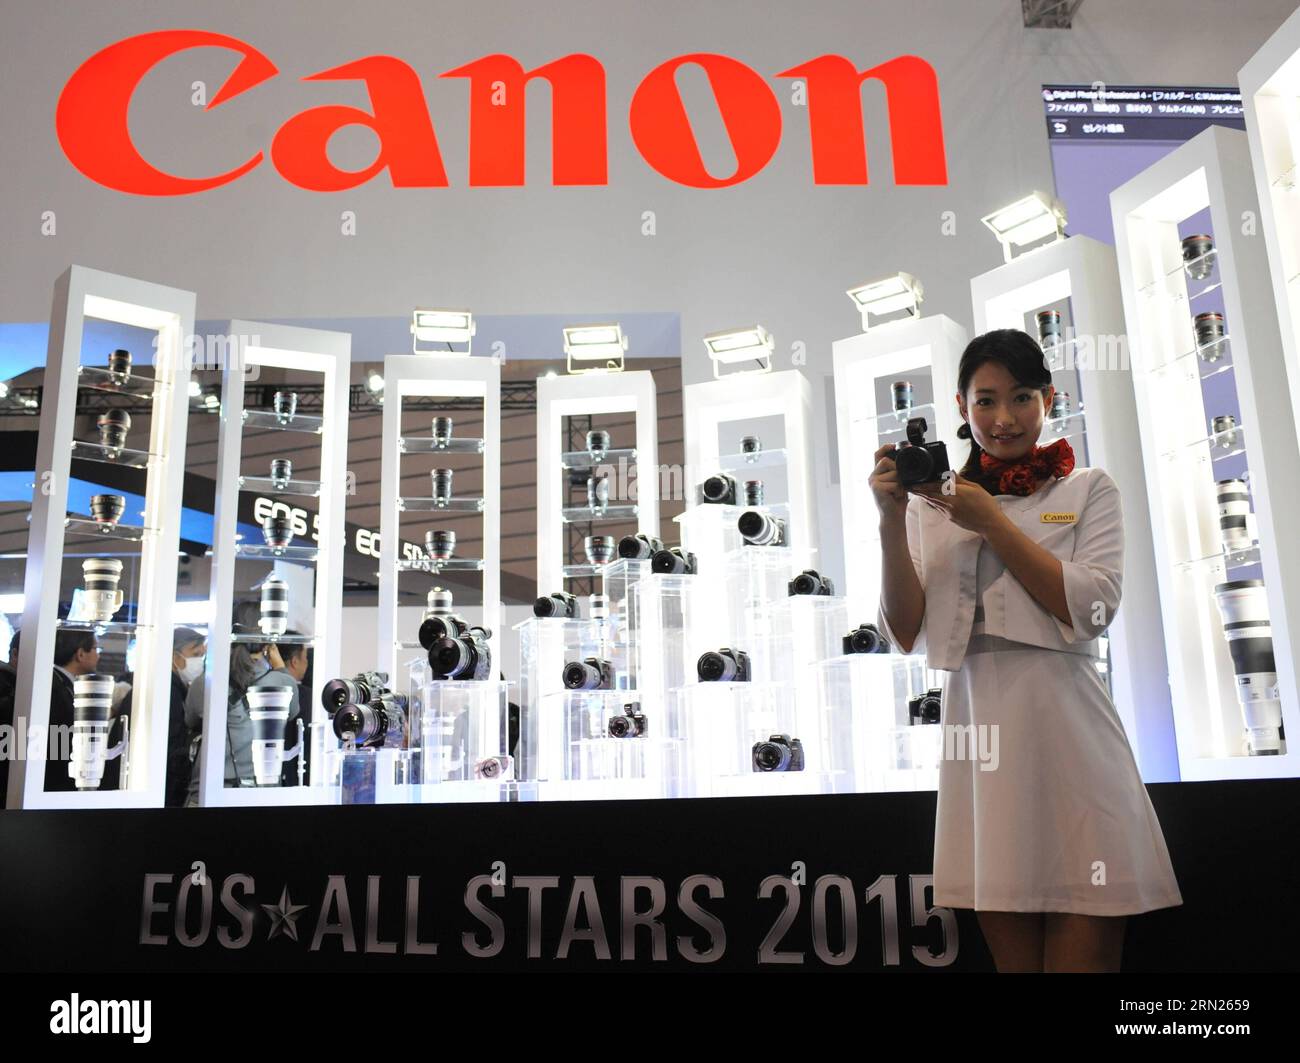 (150212) -- TOKYO, Feb. 12, 2014 -- A model poses for photos with a Canon product at the CP+ Camera and Photo Imaging Show in Yokohama, Japan, Feb. 12, 2015. The four-day exhibition was opened on Feb. 12. ) JAPAN-YOKOHAMA-TECHNOLOGY-SHOW Stringer PUBLICATIONxNOTxINxCHN   Tokyo Feb 12 2014 a Model Poses for Photos With a Canon Product AT The  Camera and Photo Imaging Show in Yokohama Japan Feb 12 2015 The Four Day Exhibition what opened ON Feb 12 Japan Yokohama Technology Show Stringer PUBLICATIONxNOTxINxCHN Stock Photo